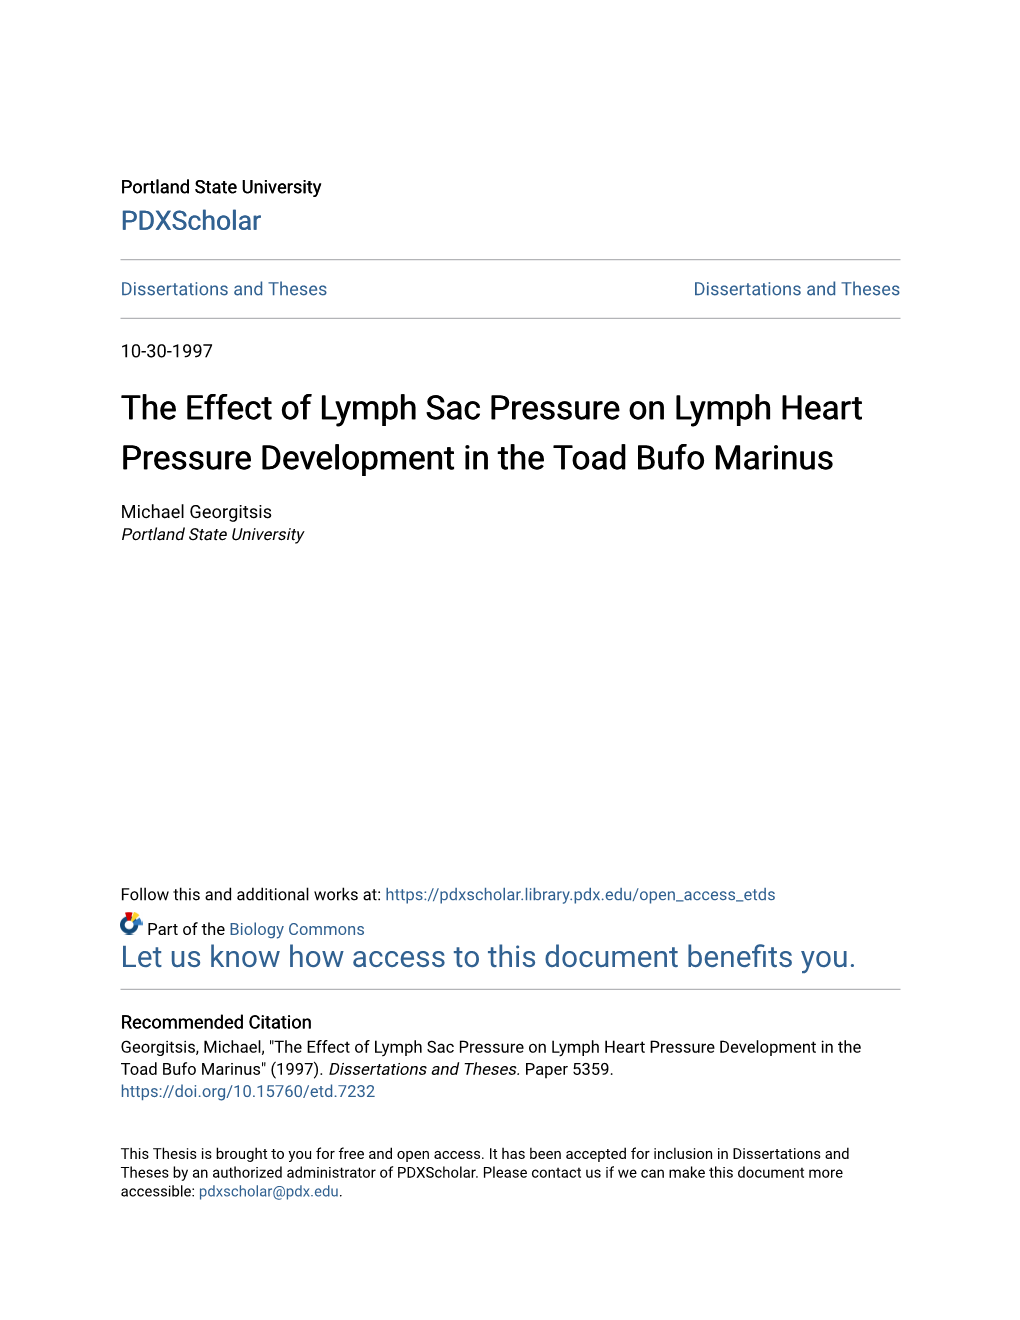 The Effect of Lymph Sac Pressure on Lymph Heart Pressure Development in the Toad Bufo Marinus